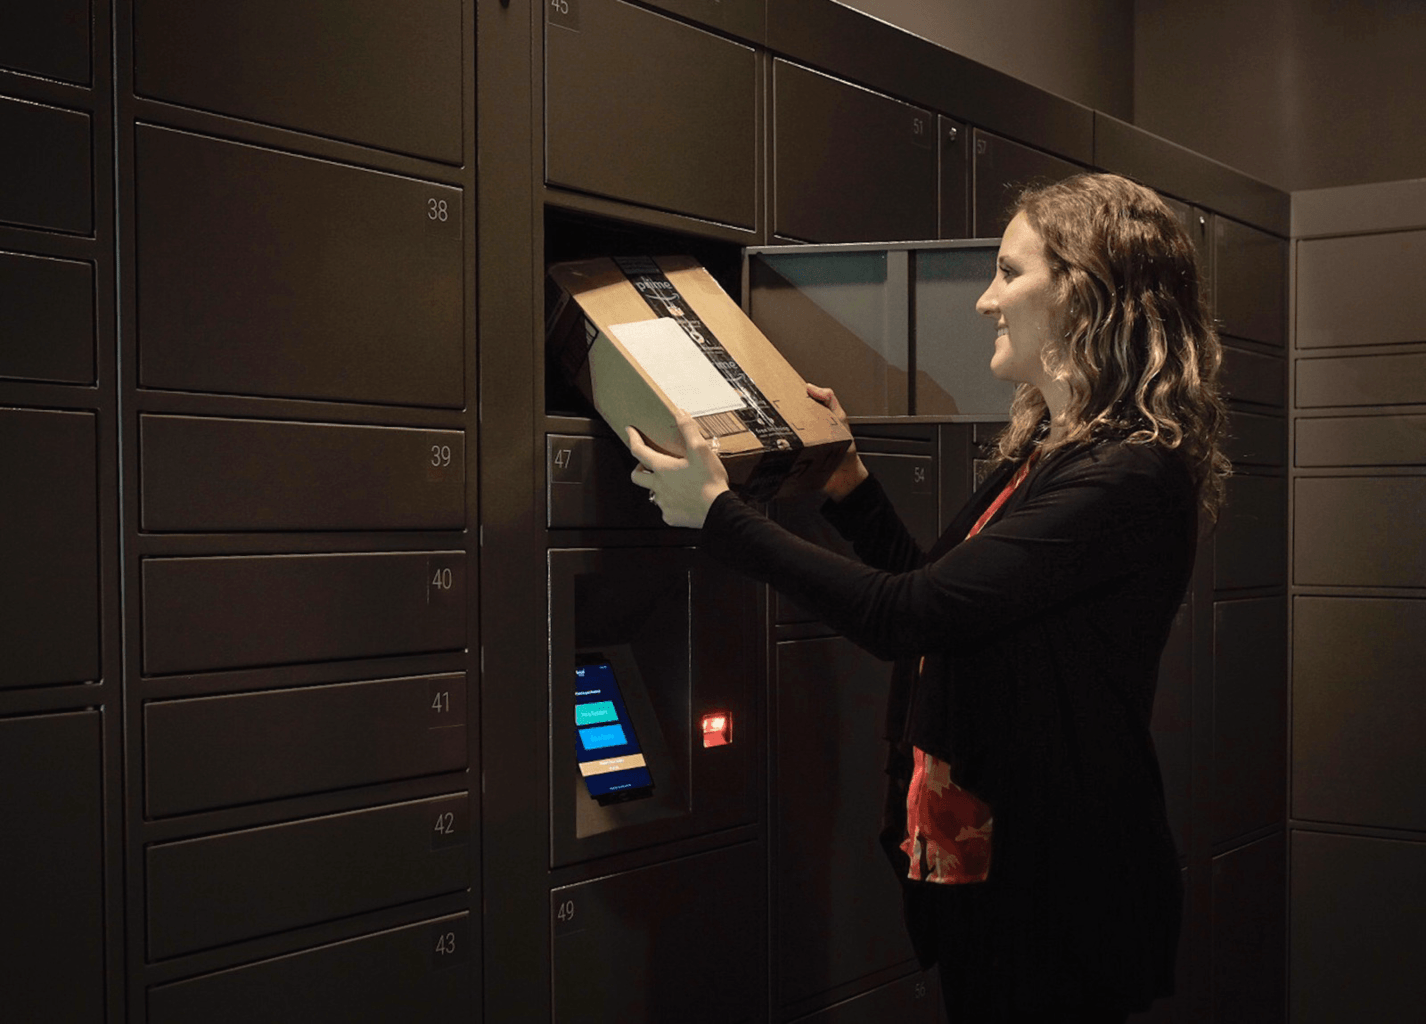 French La Poste rolls out Collect & Station lockers nationwide